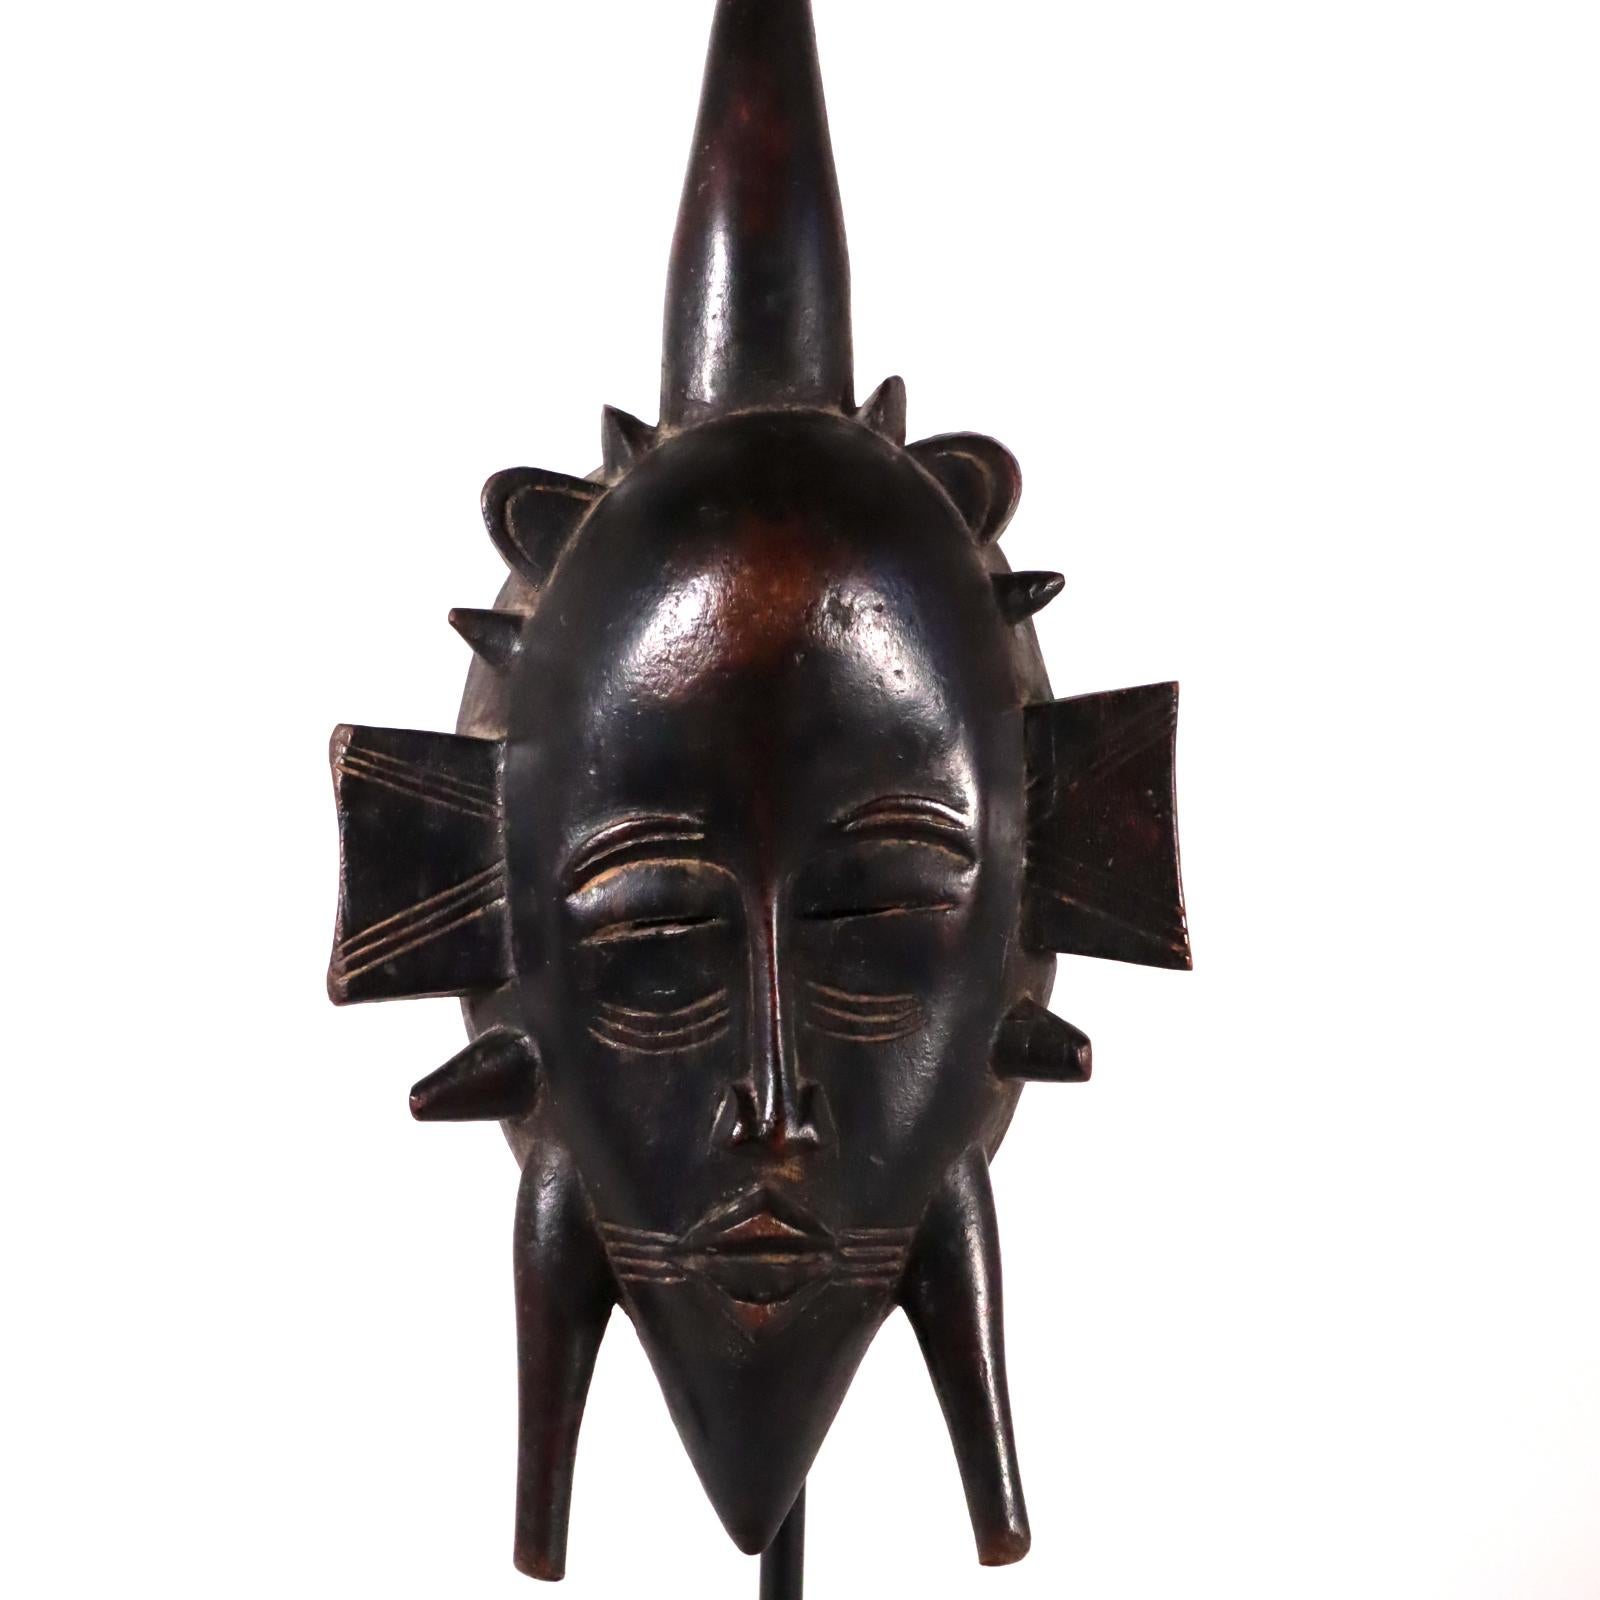 A simple and elegant face mask from the Senufo people of West Africa. The Senufo live in areas that are parts of Mali, Ivory Coast (Cote d'Ivoire) and Burkina Faso. Created in the early to mid-20th century. Hardwood with a black patina, rubbing and